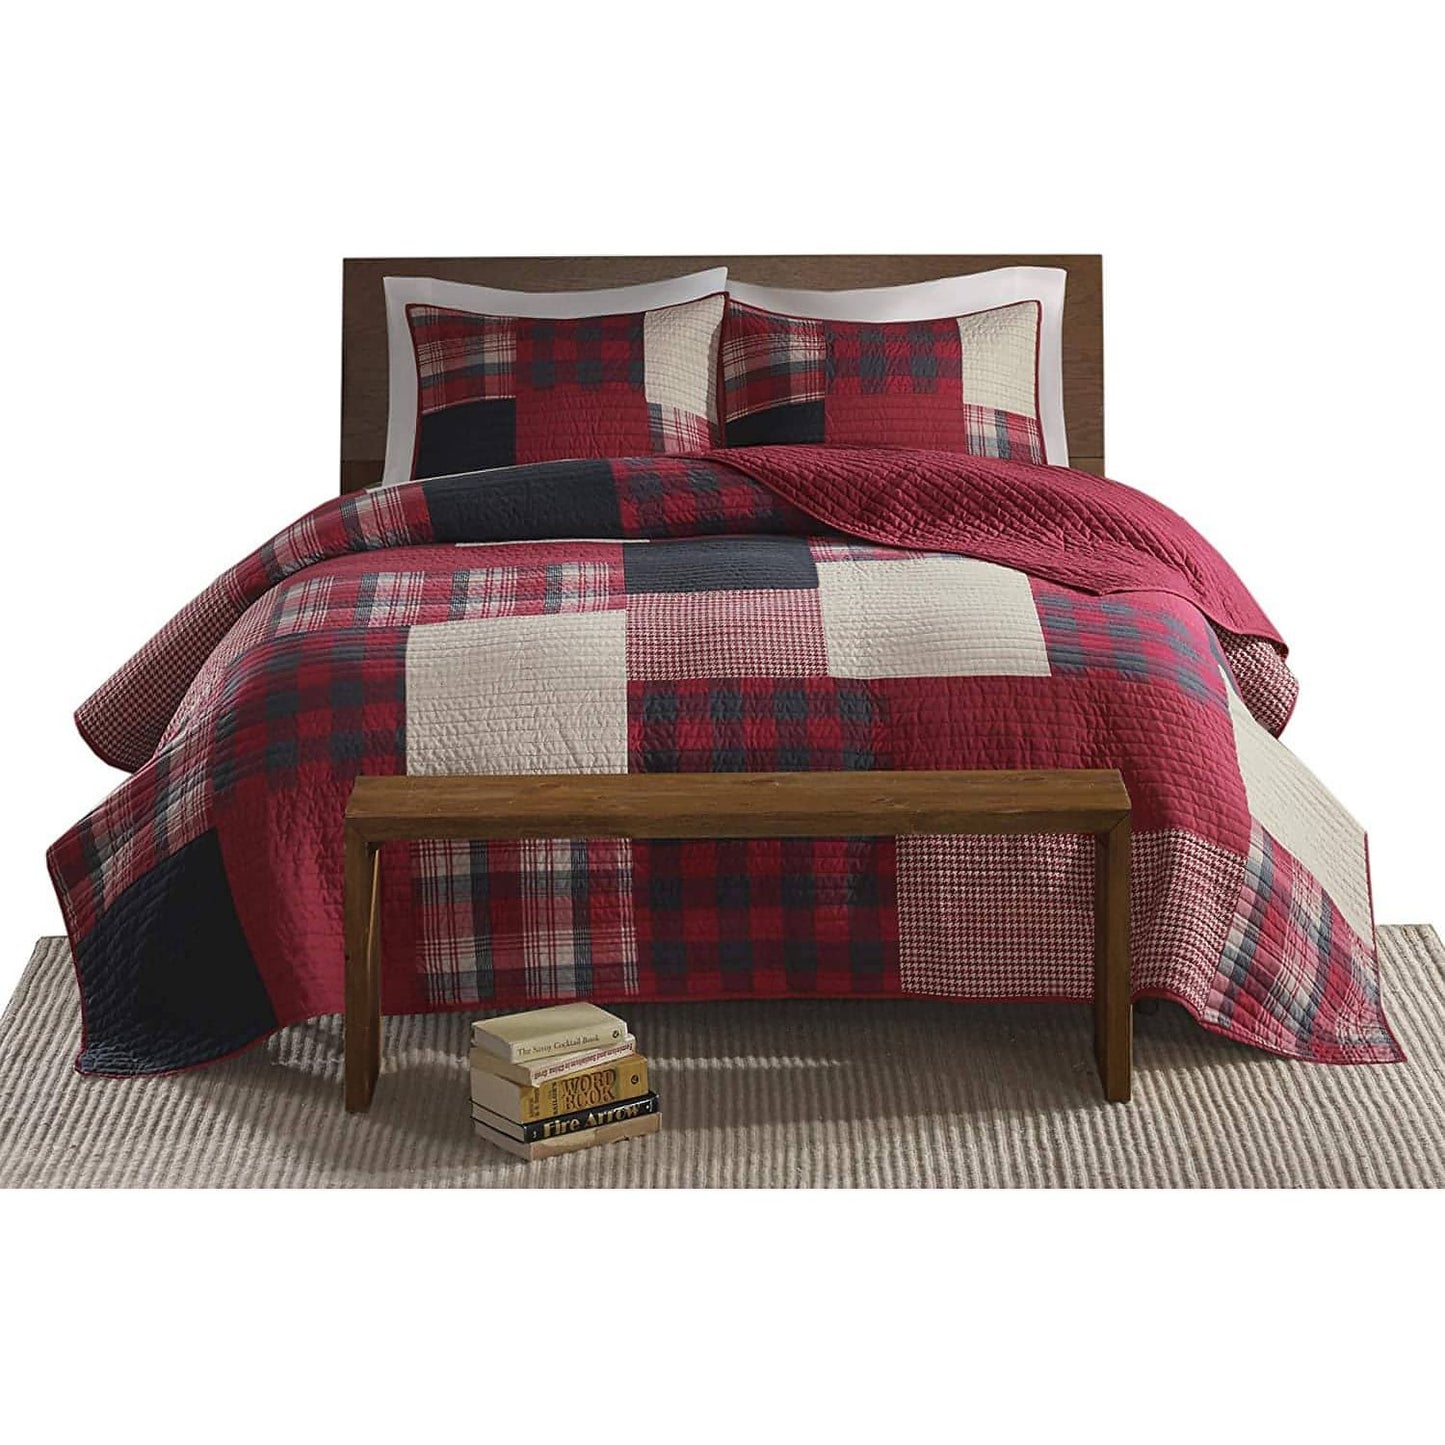 Woolrich-Woolrich 100% Cotton Quilt Reversible Cabin Lifestyle Design All Season, Breathable Coverlet Bedspread Bedding Set, Matching Shams, King/Cal King(110"x96"), Plaid Red, 3 Piece - Brandat Outlet